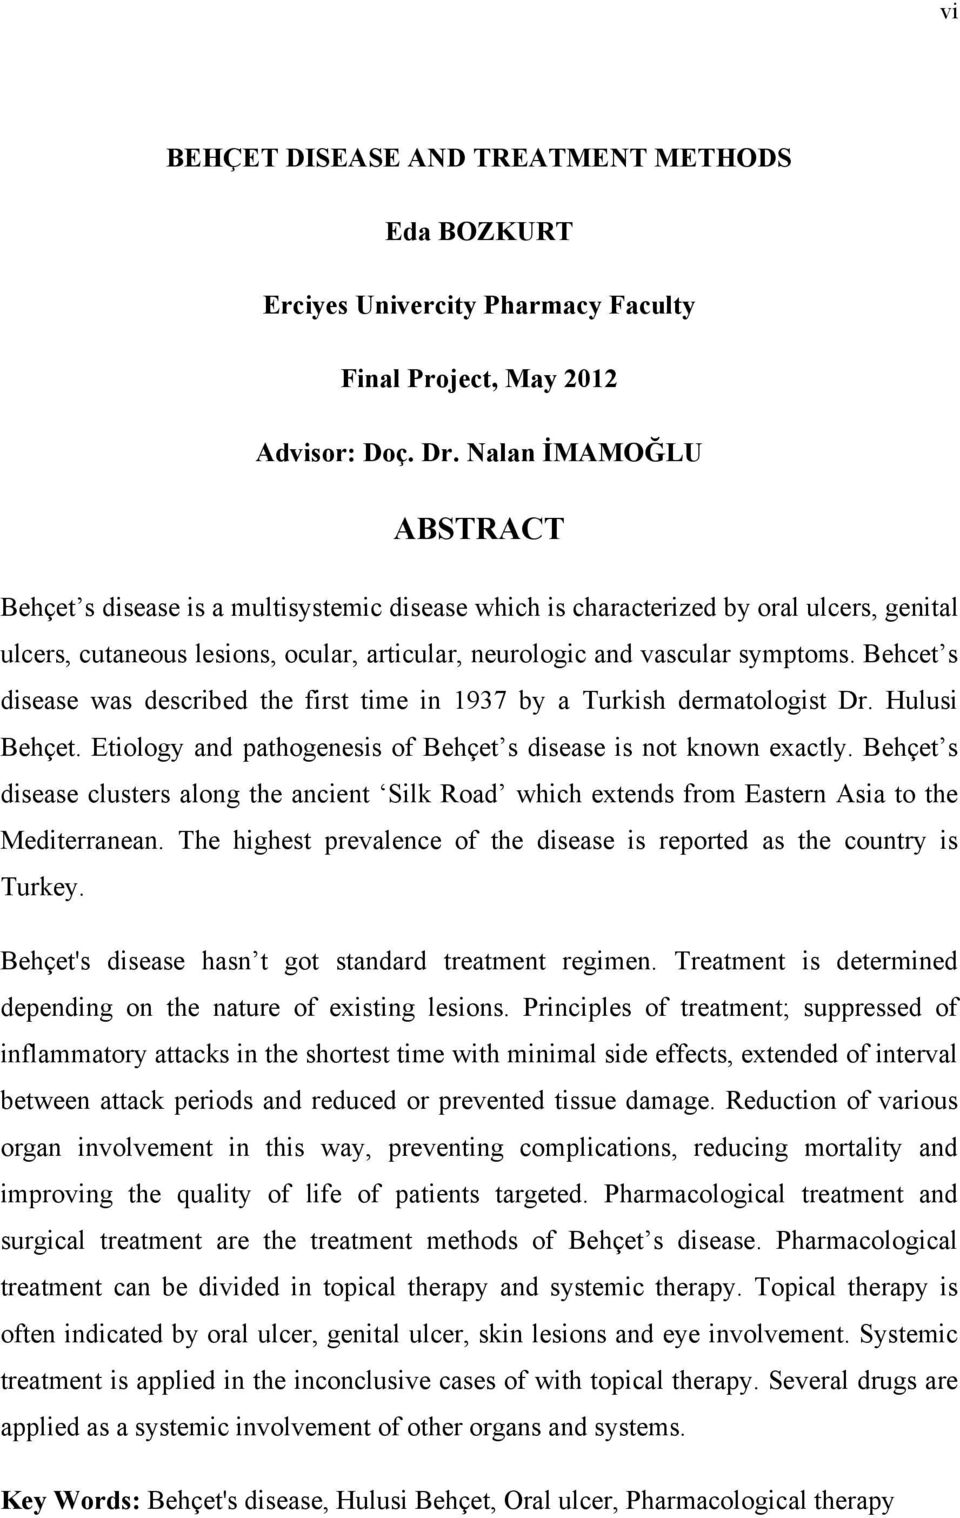 Behcet s disease was described the first time in 1937 by a Turkish dermatologist Dr. Hulusi Behçet. Etiology and pathogenesis of Behçet s disease is not known exactly.